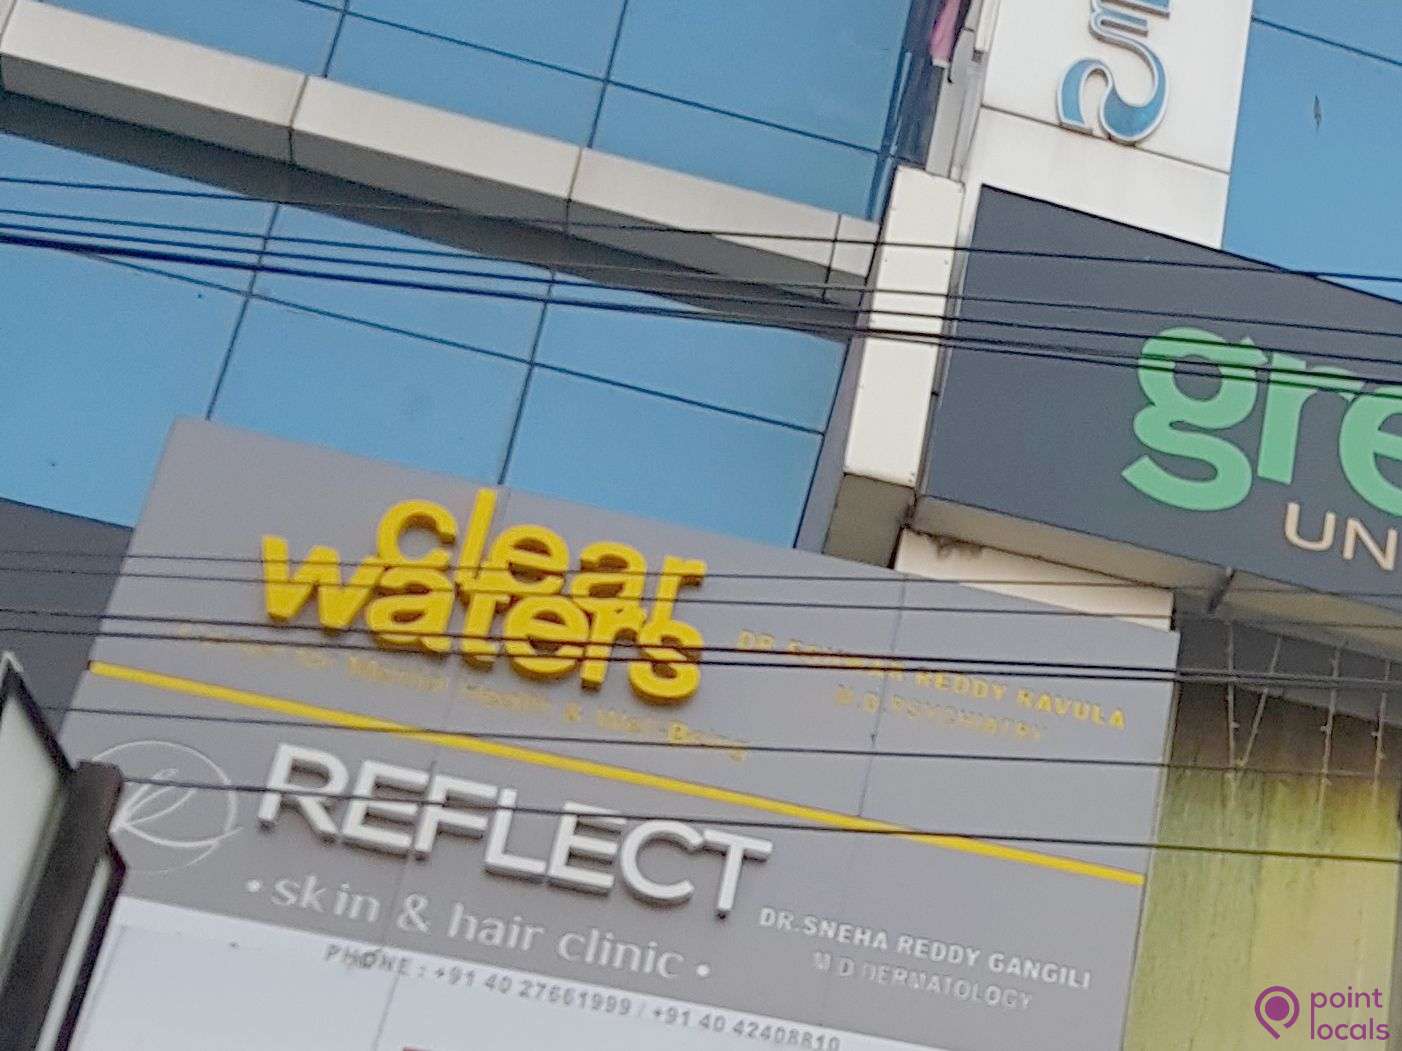 Reflect Skin & Hair Clinic - Skin Care Clinic in Hyderabad,Telangana |  Pointlocals